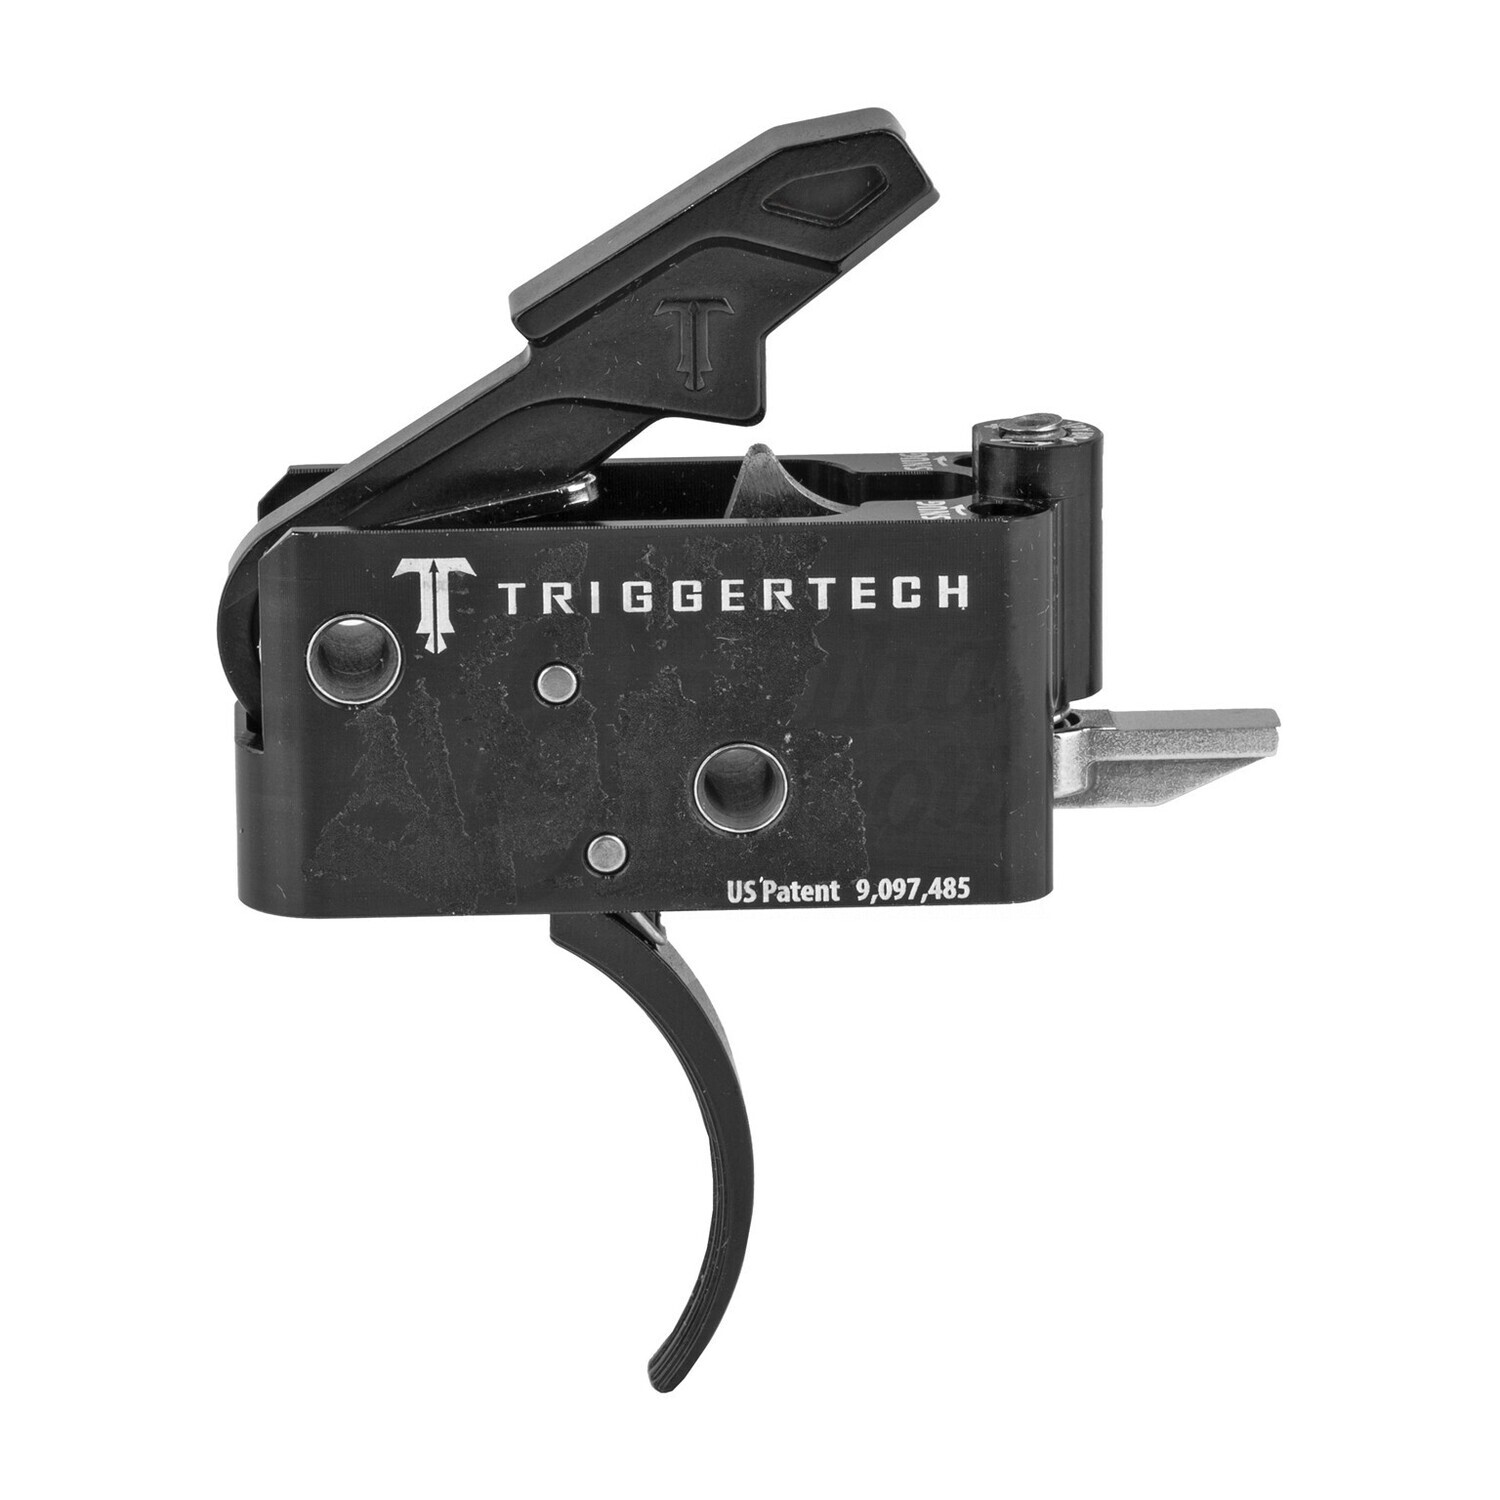 Triggertech AR15 Adaptable 2-stage Trigger